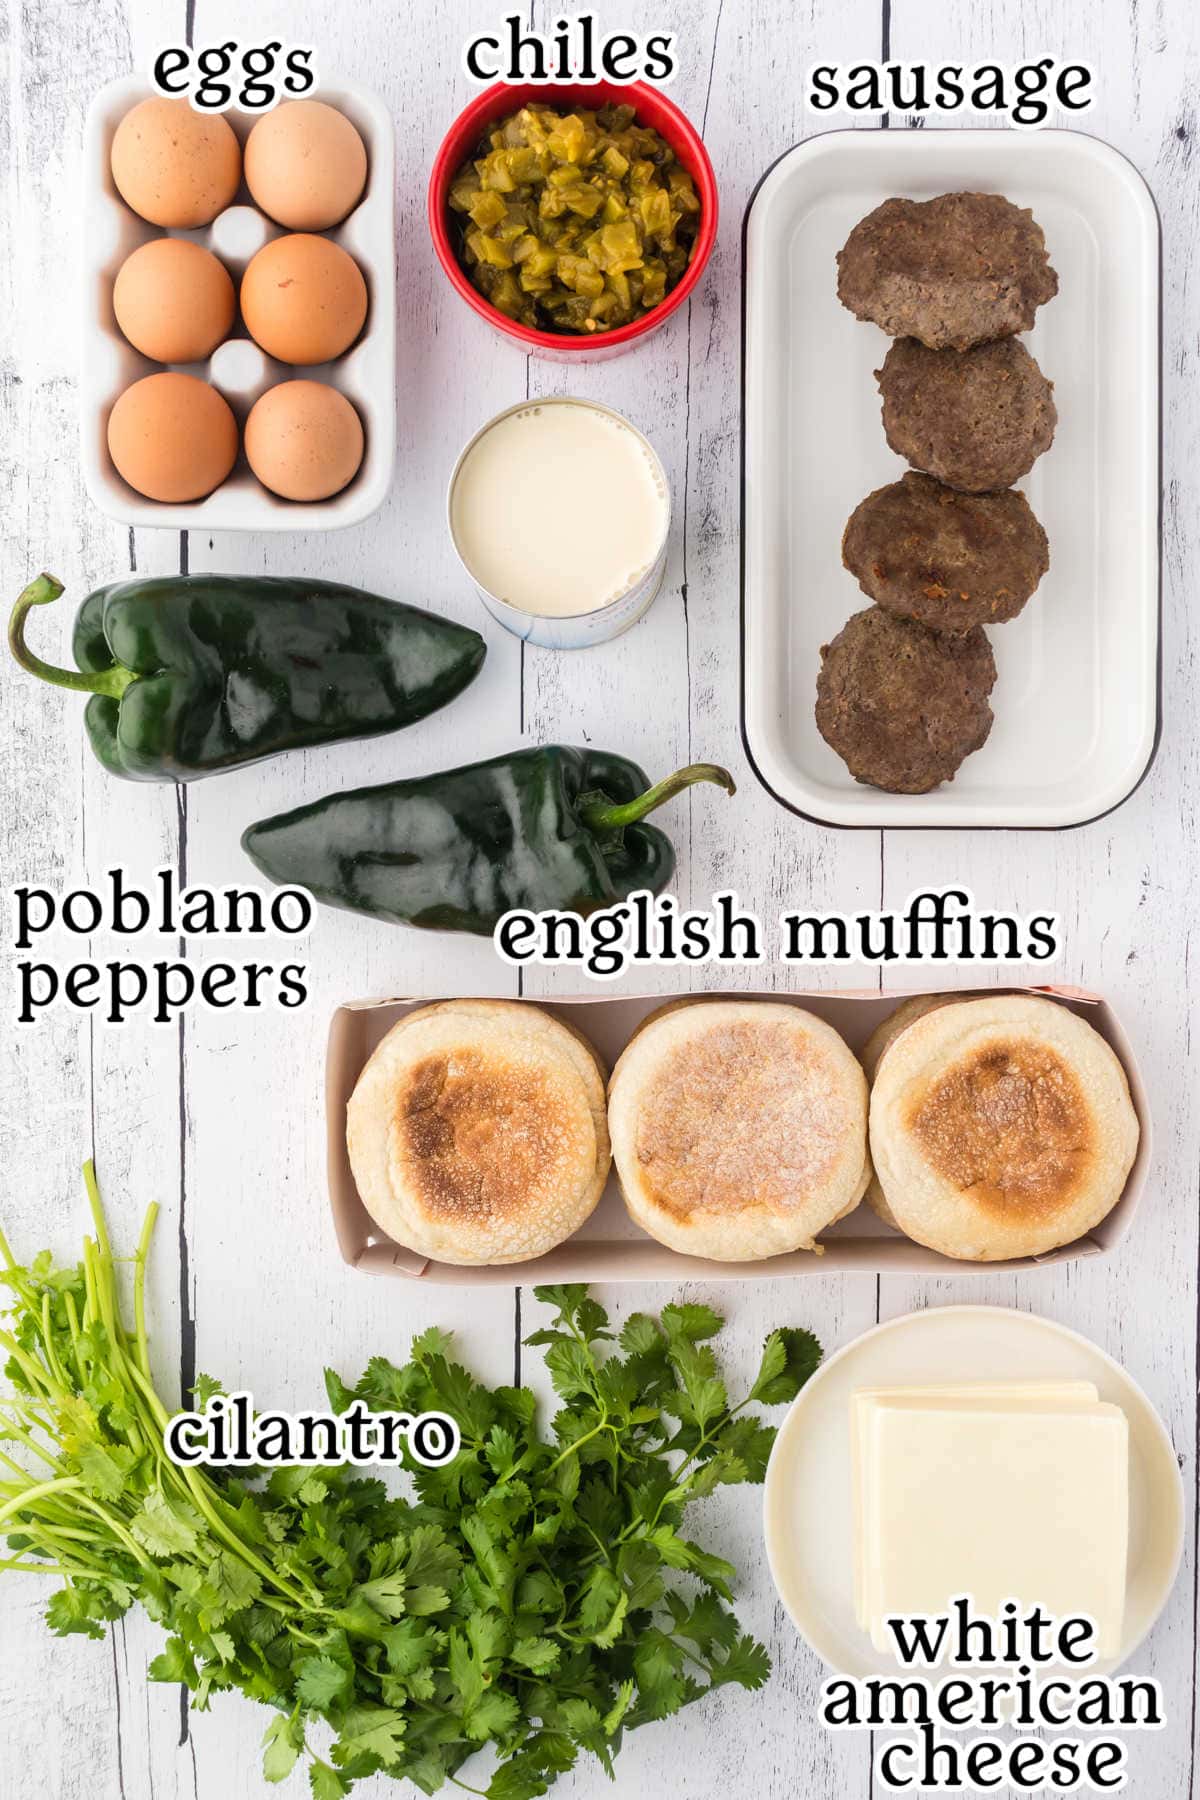 Labeled ingredients for this recipe on a white board.